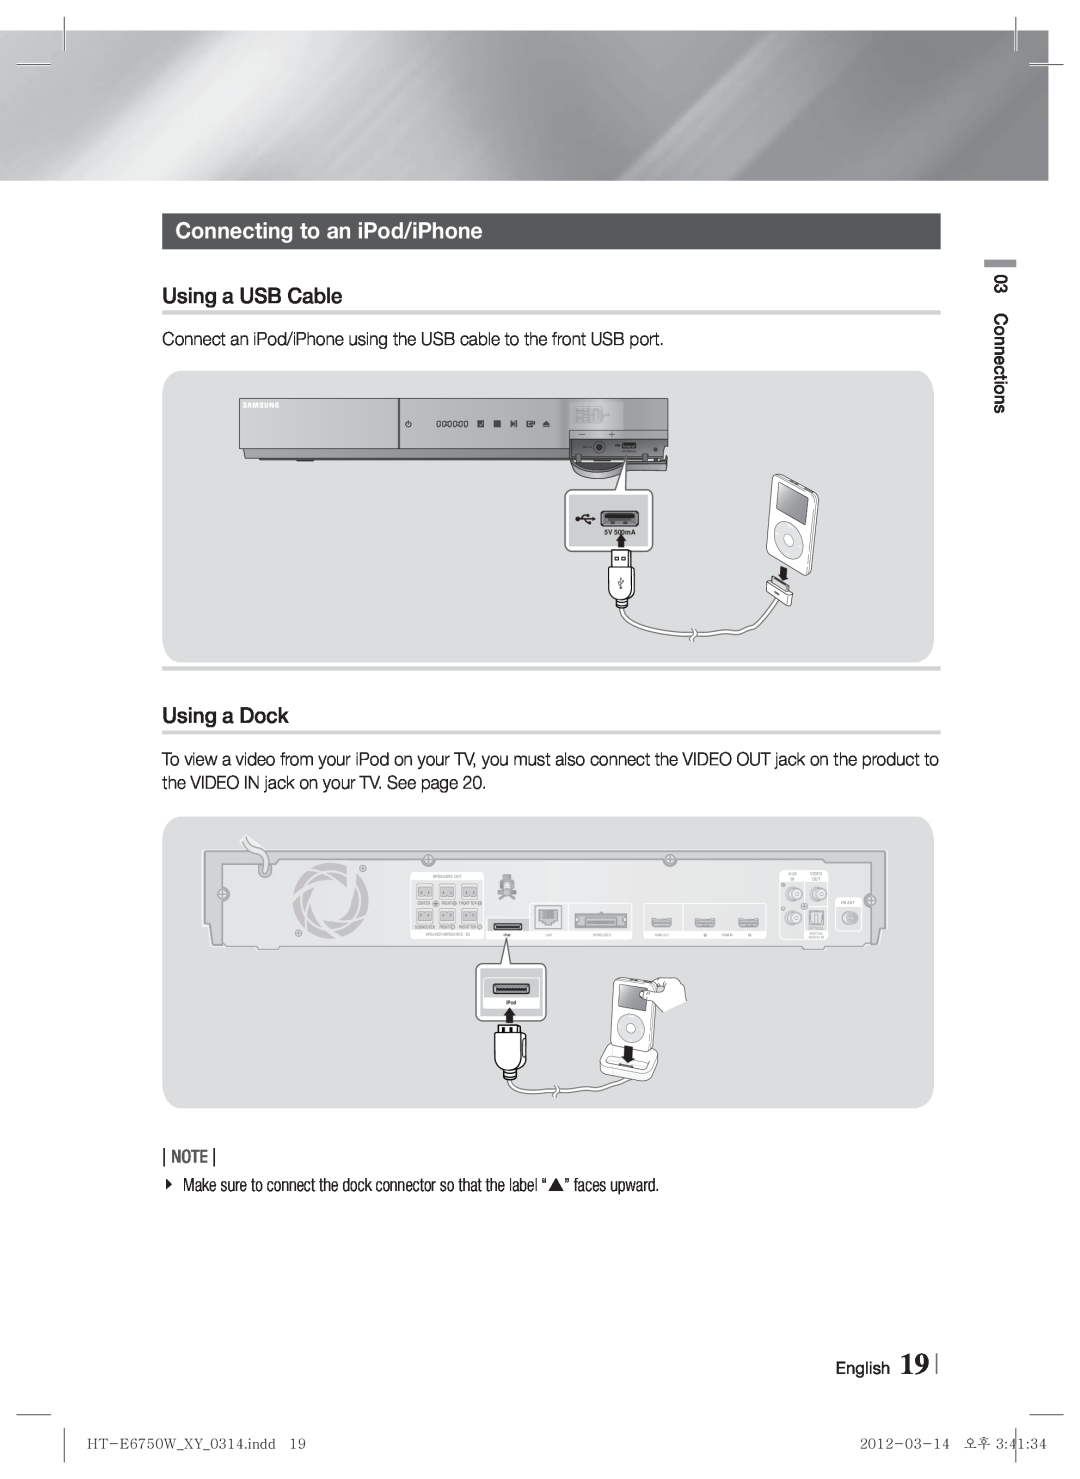 Samsung HT-E6750W user manual Connecting to an iPod/iPhone, Using a USB Cable, Using a Dock, Note 